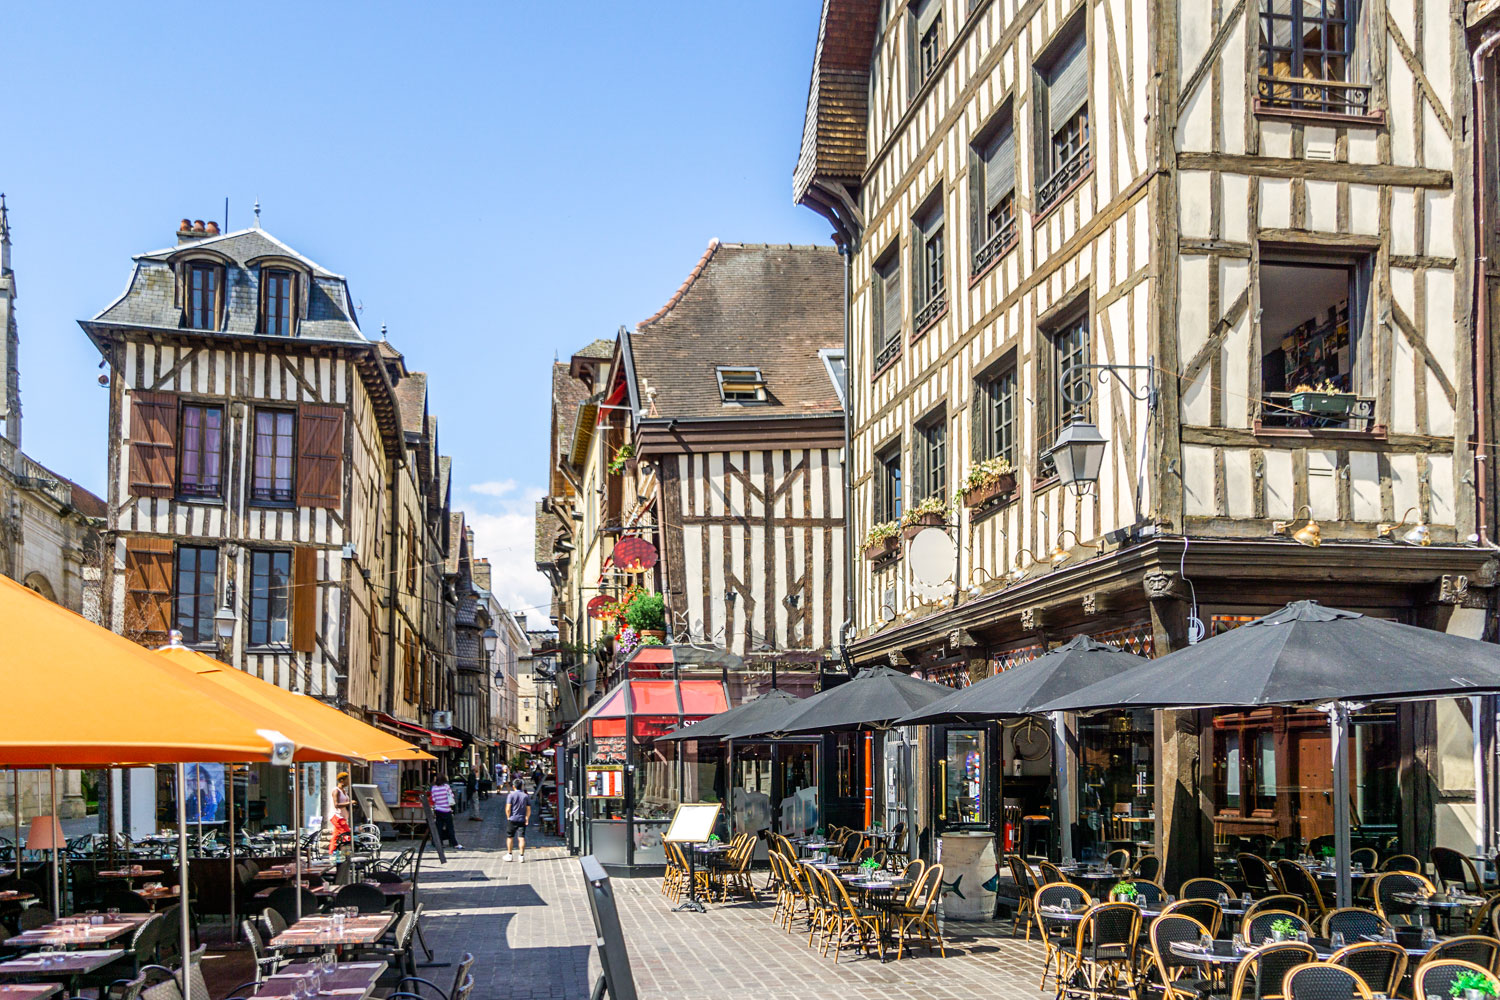 Half-timbered-medieval-houses-in-Troyes,-France